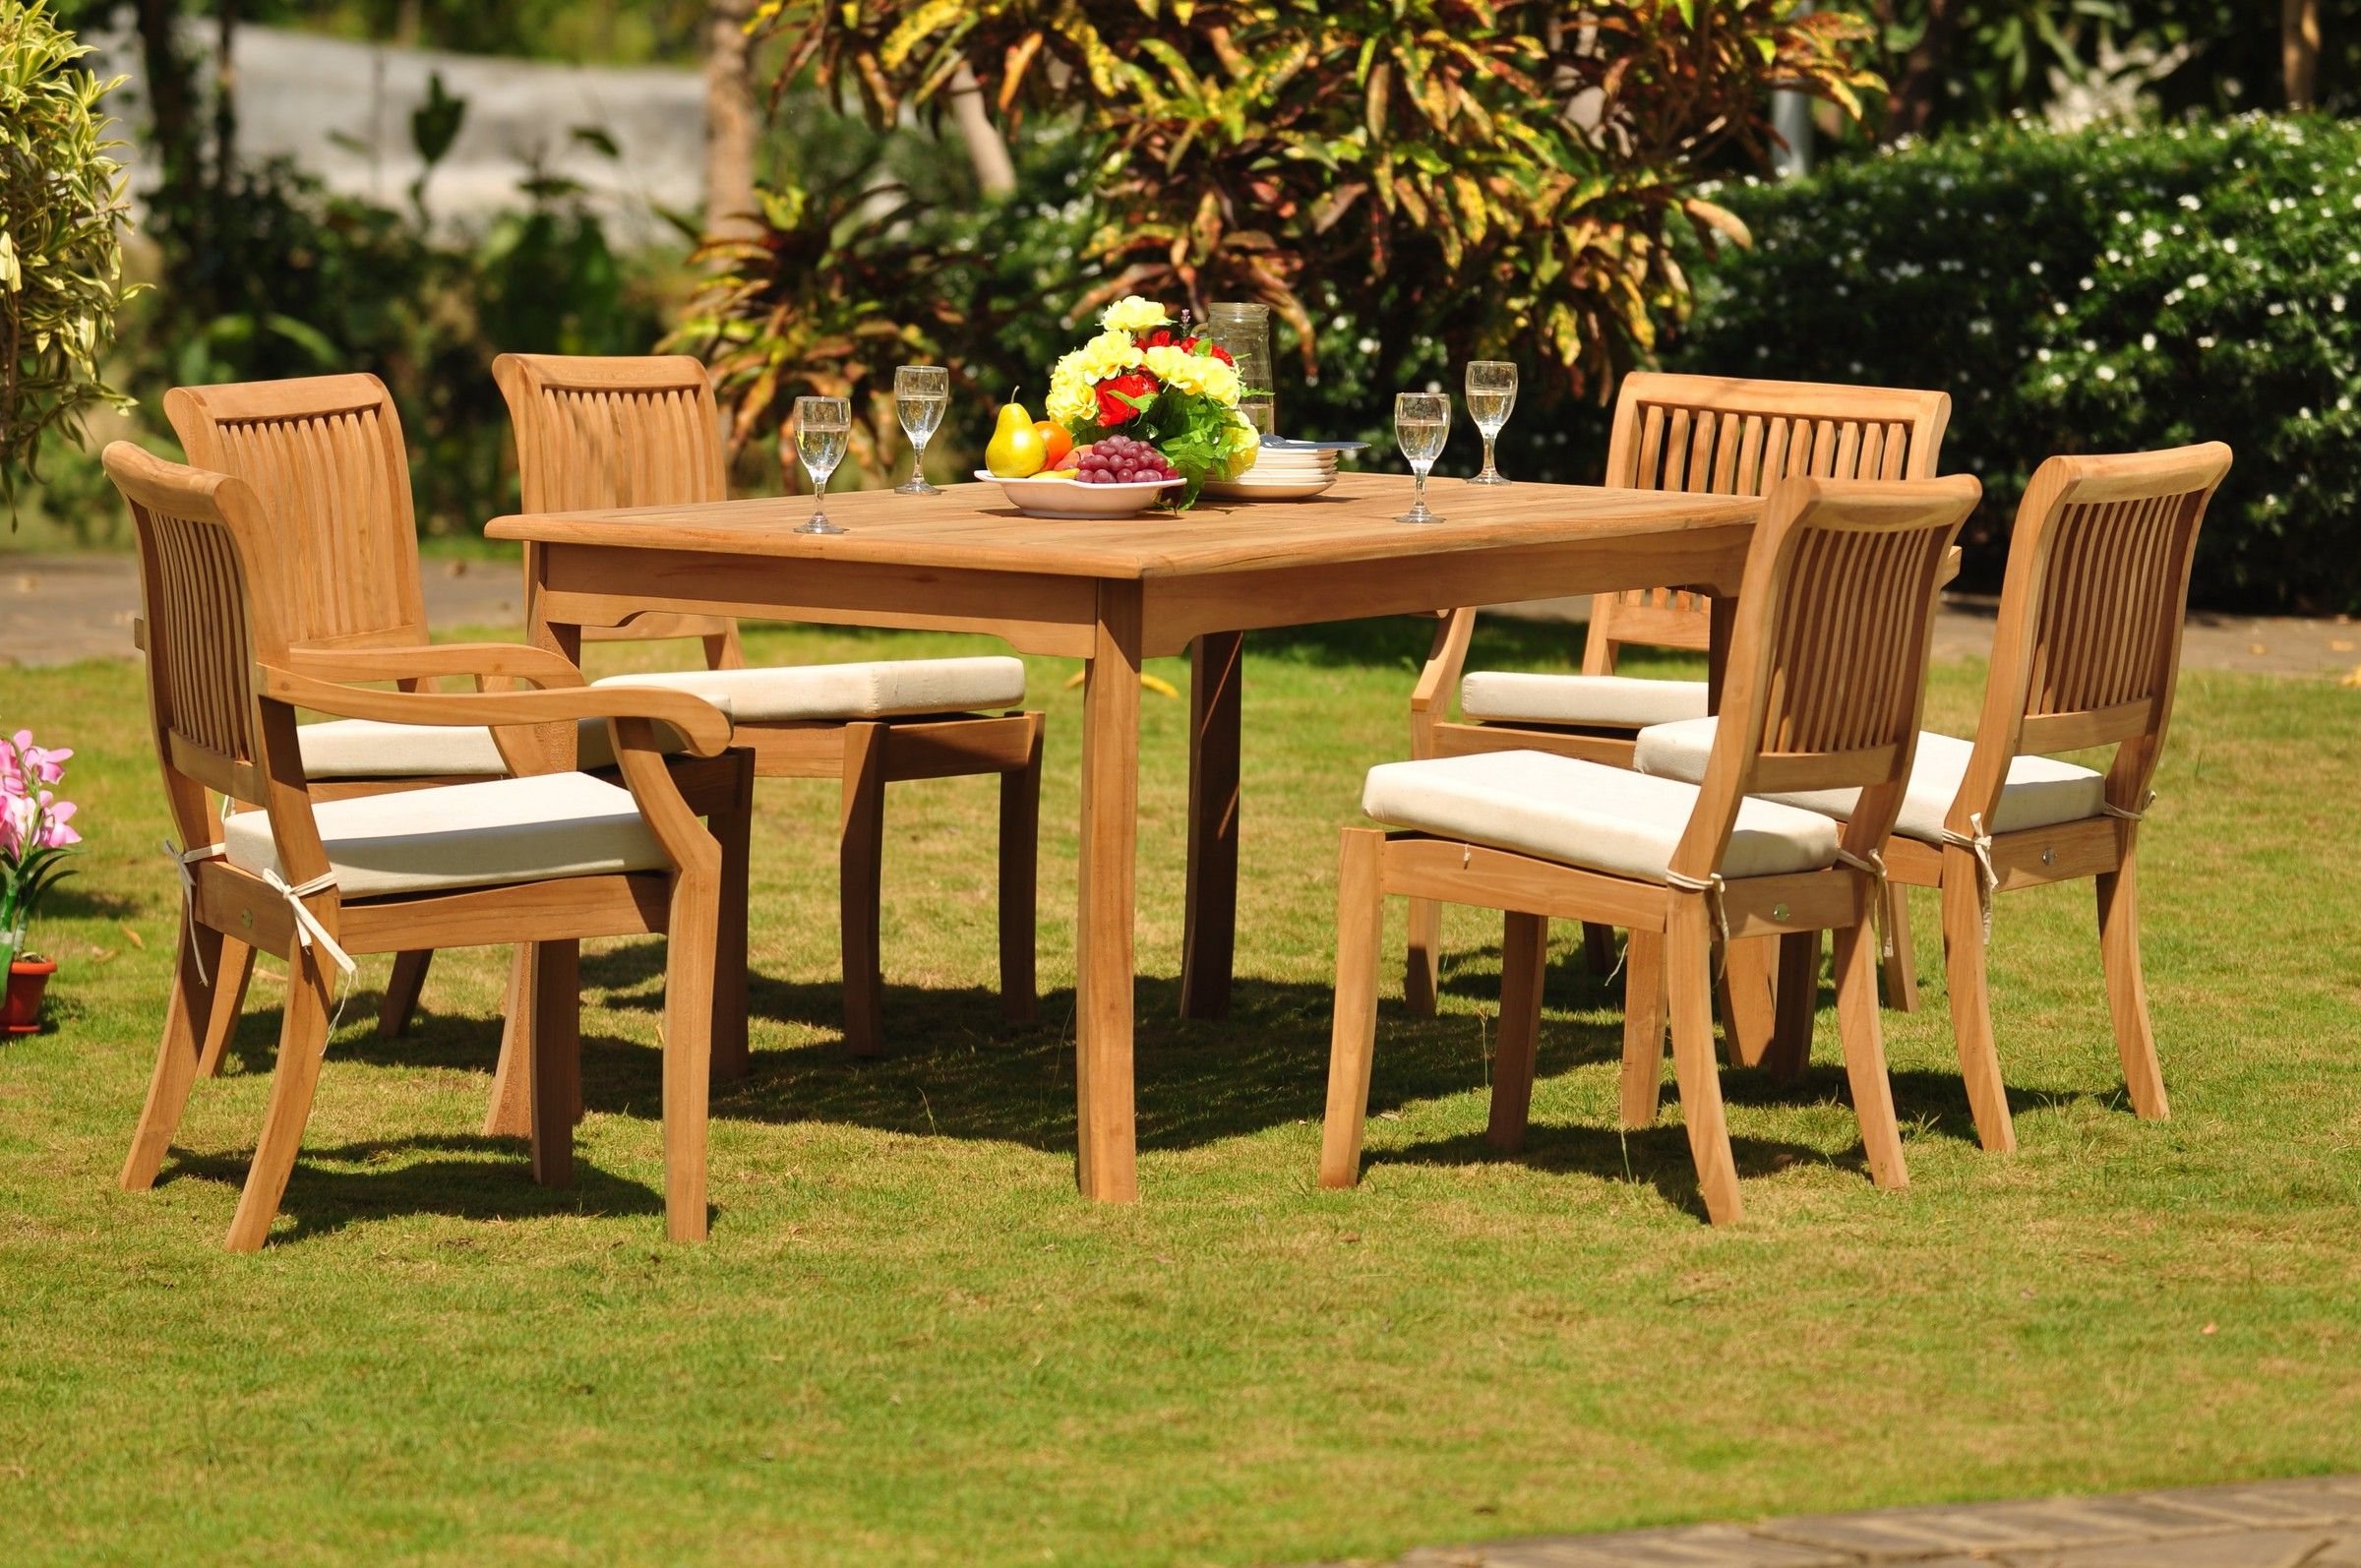 Trendy Teak Dining Set: 6 Seater 7 Pc: 71" Rectangle Table & 2 Stacking Arbor With Regard To Teak Wood Rectangular Patio Dining Sets (View 8 of 15)